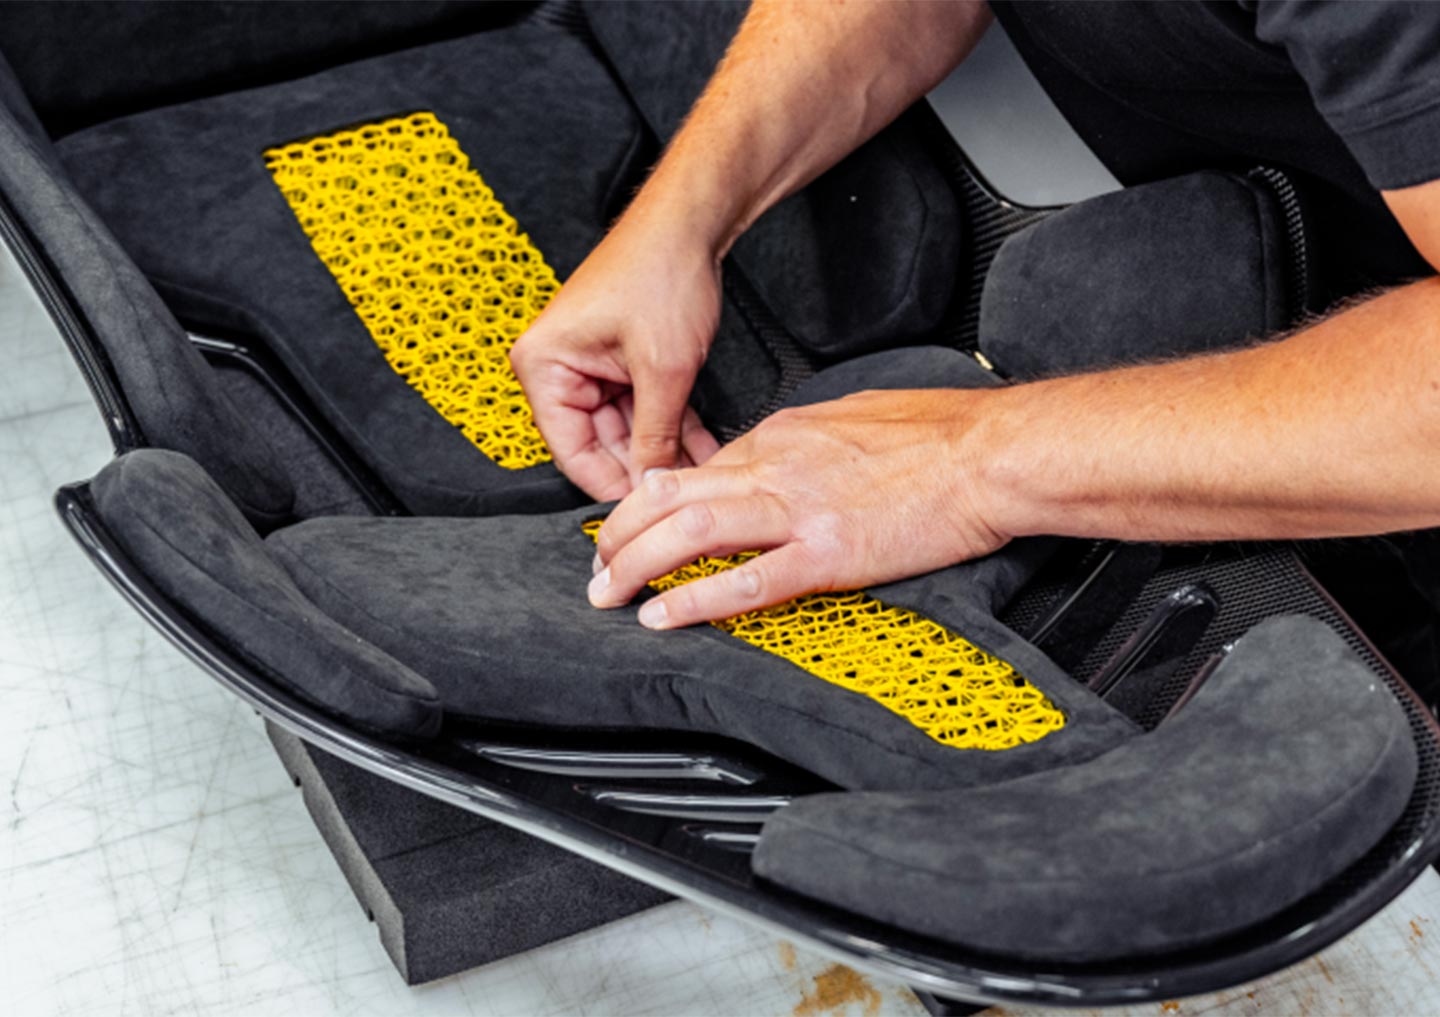 OECHSLER uses additive manufacturing to develop and produce high-performance car upholstery that is individually adapted to the user's needs